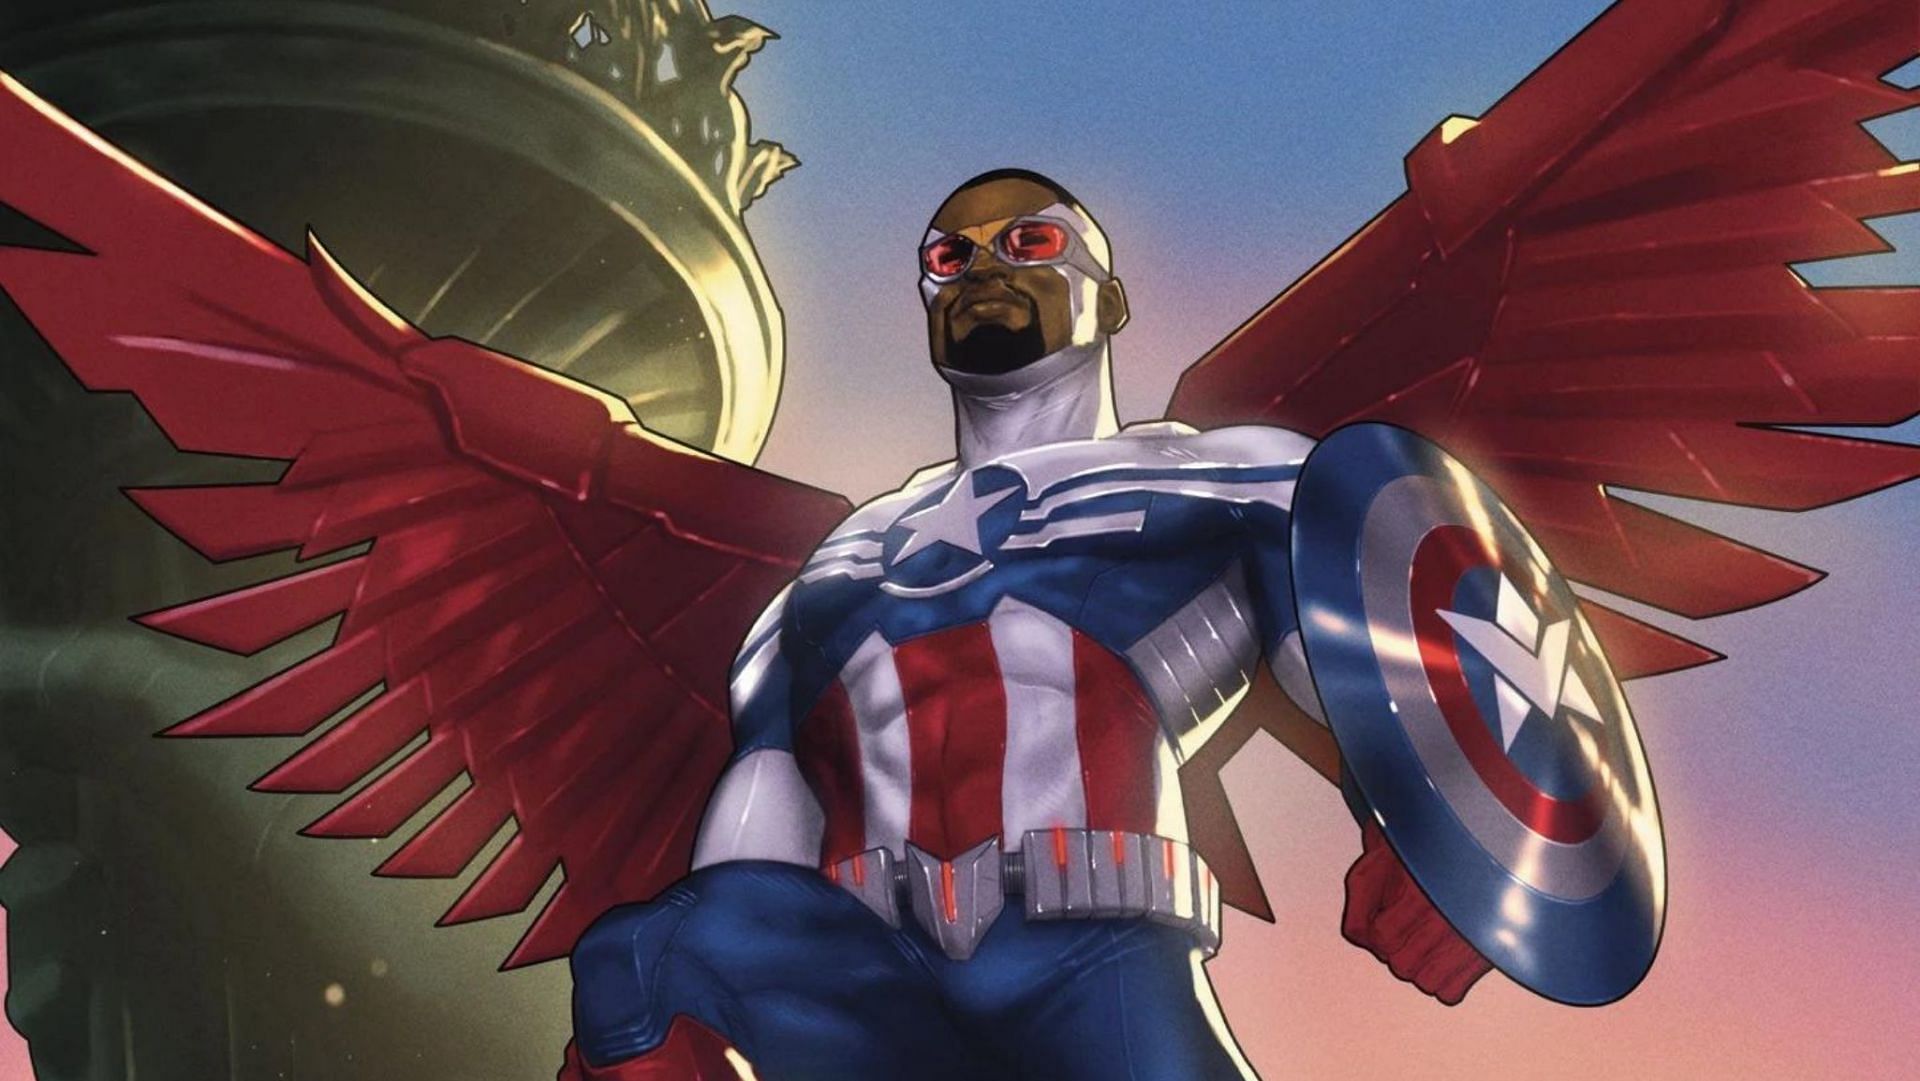 Sam Wilson donning the iconic red, white, and blue Captain America suit in the comic book series (Image via Marvel Comics)